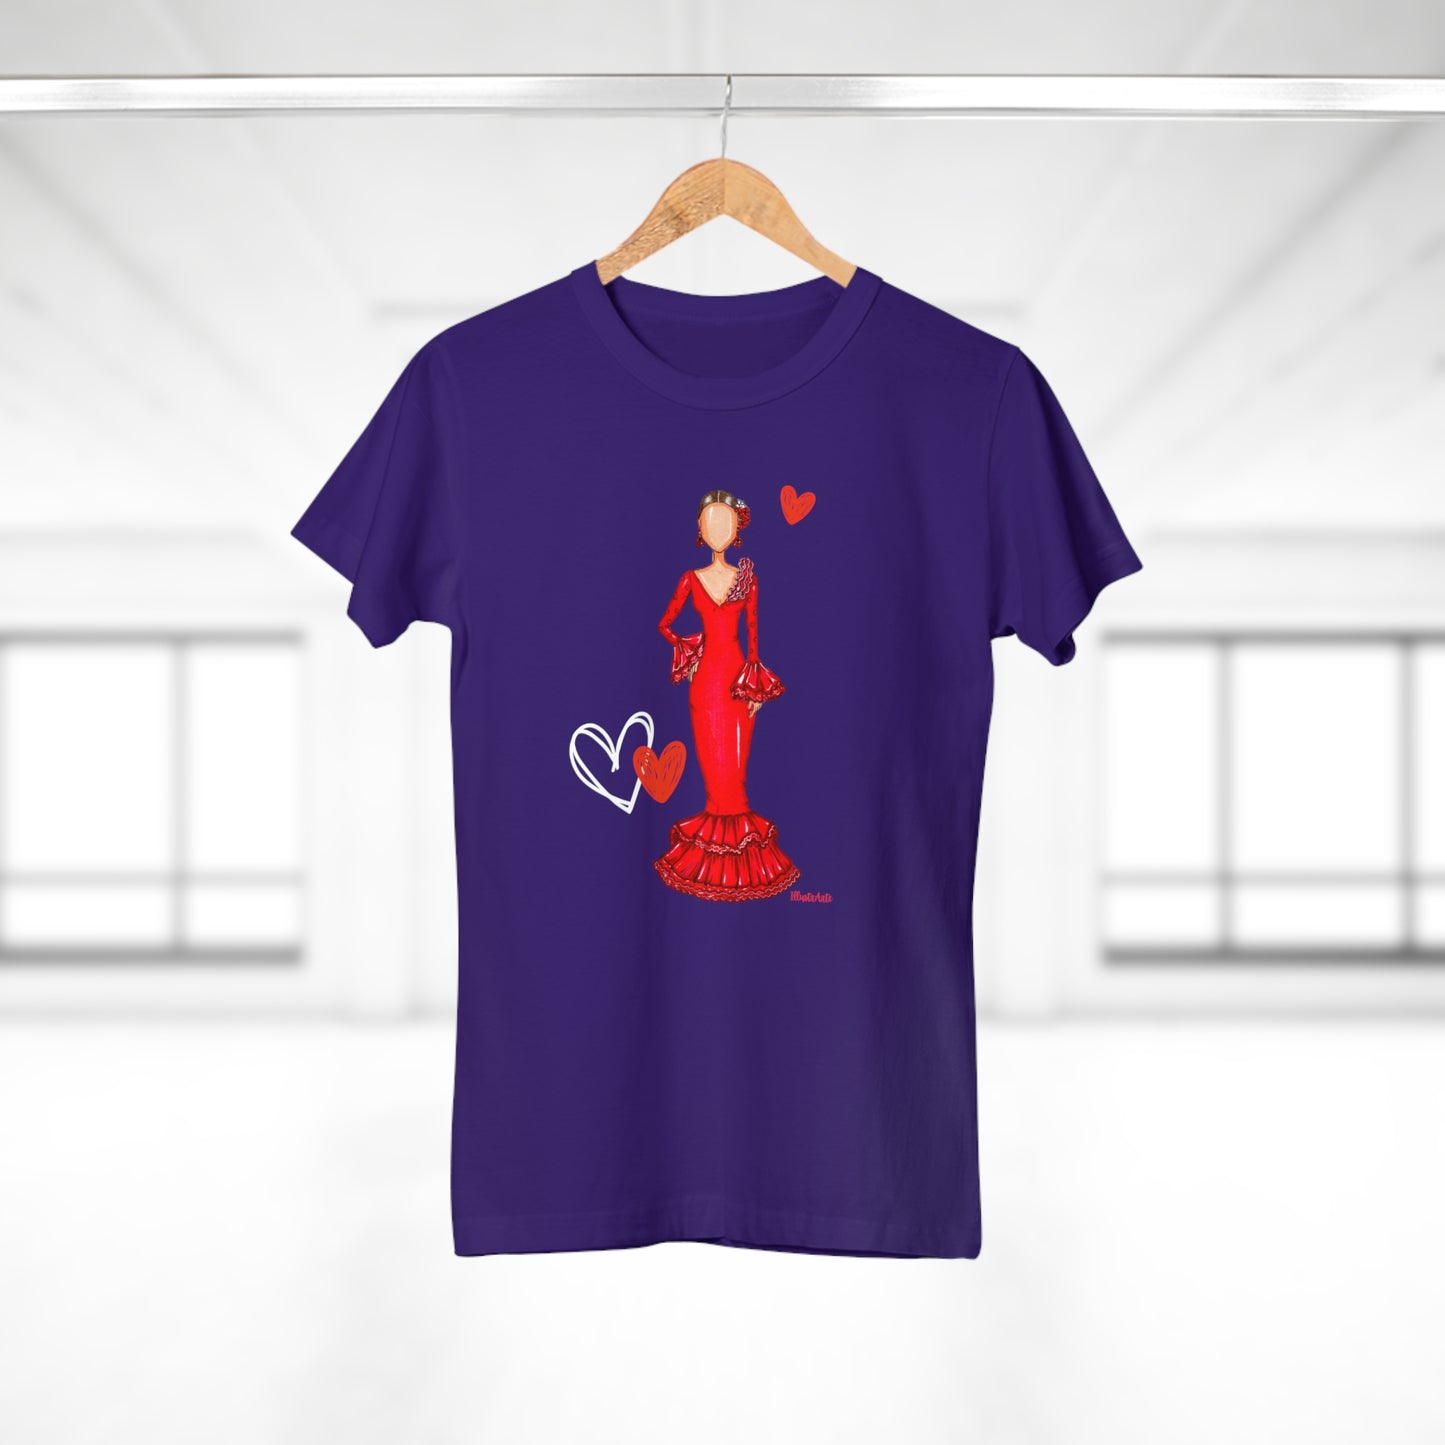 a purple t - shirt with a woman in a red dress